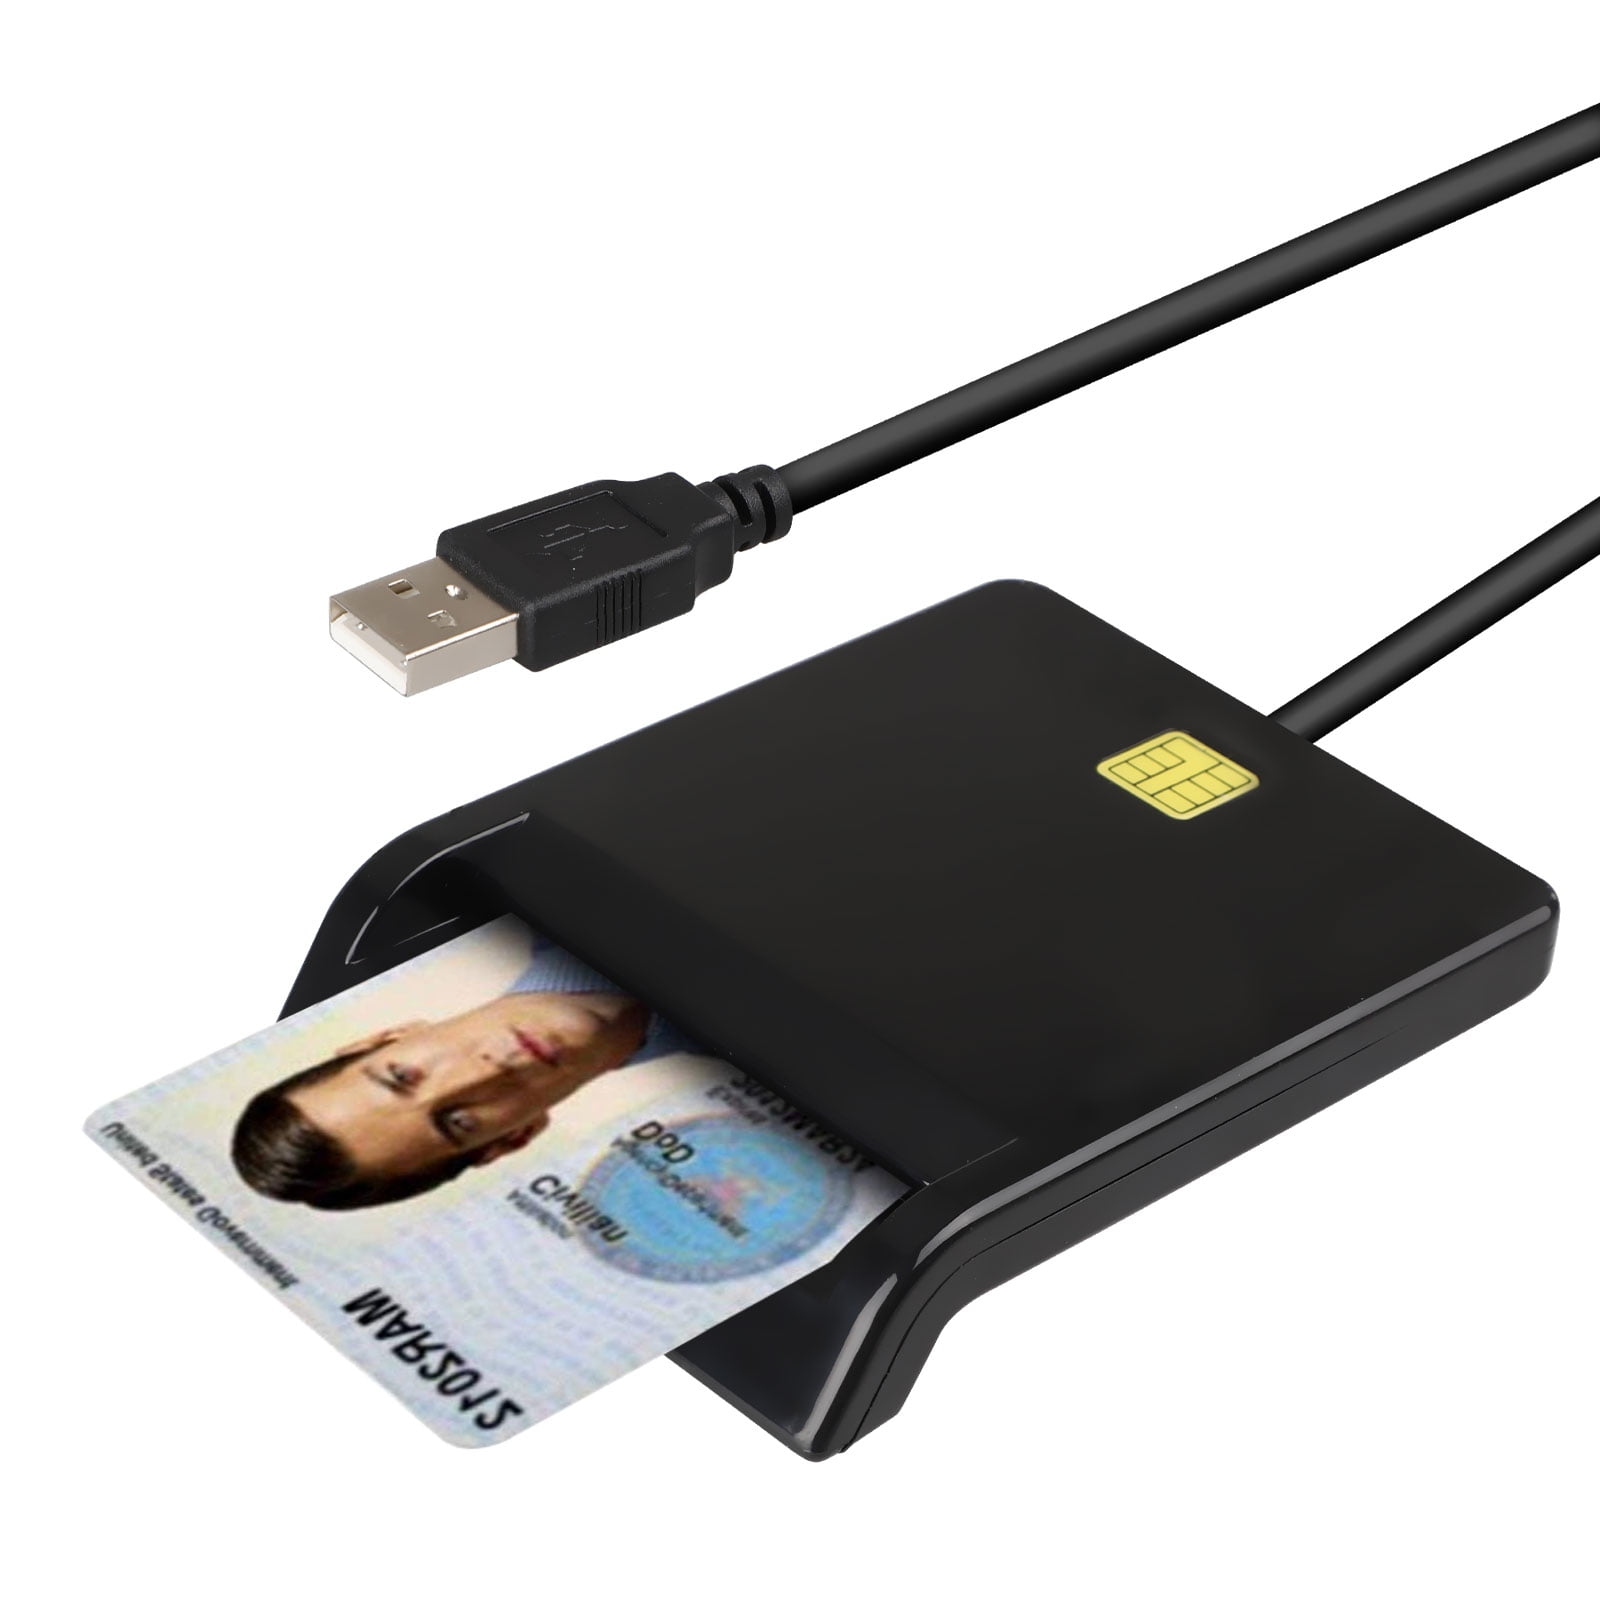 GemPlus GemPC Card Smart Card Reader Writer CAC Military ID PCMCIA